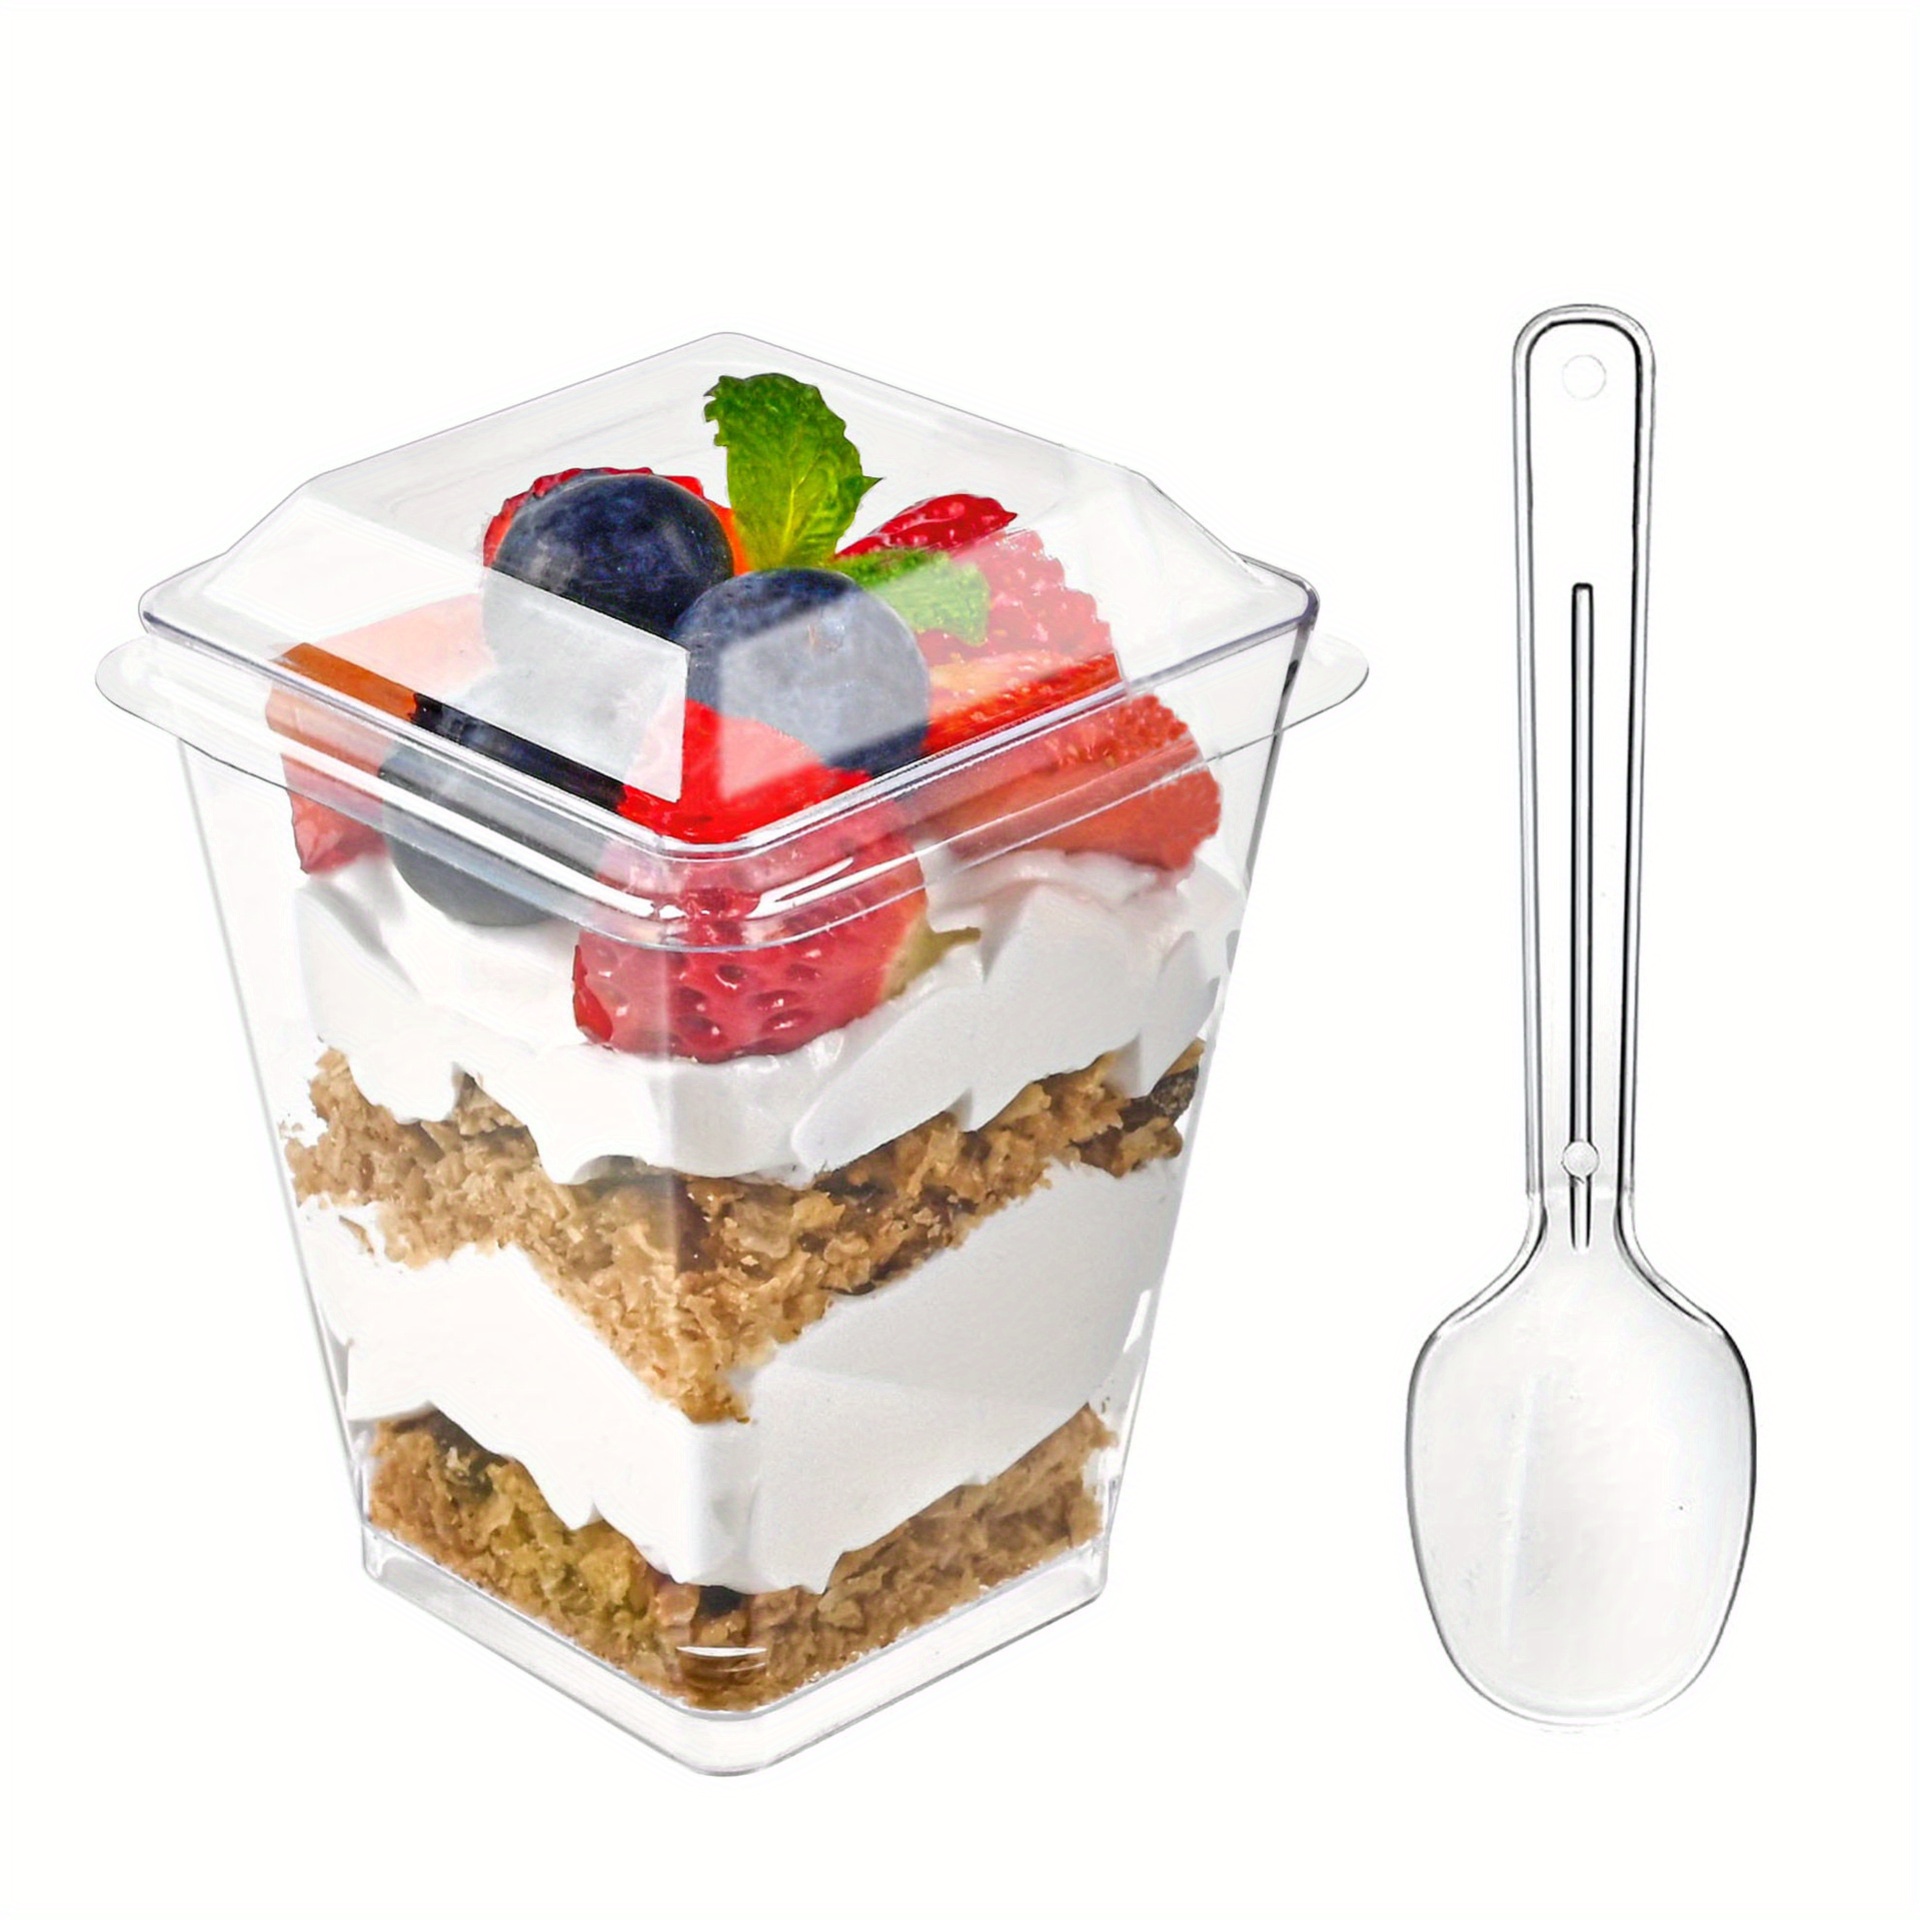 400ml Clear Plastic Parfait Cups with Lids and Spoon - Reusable